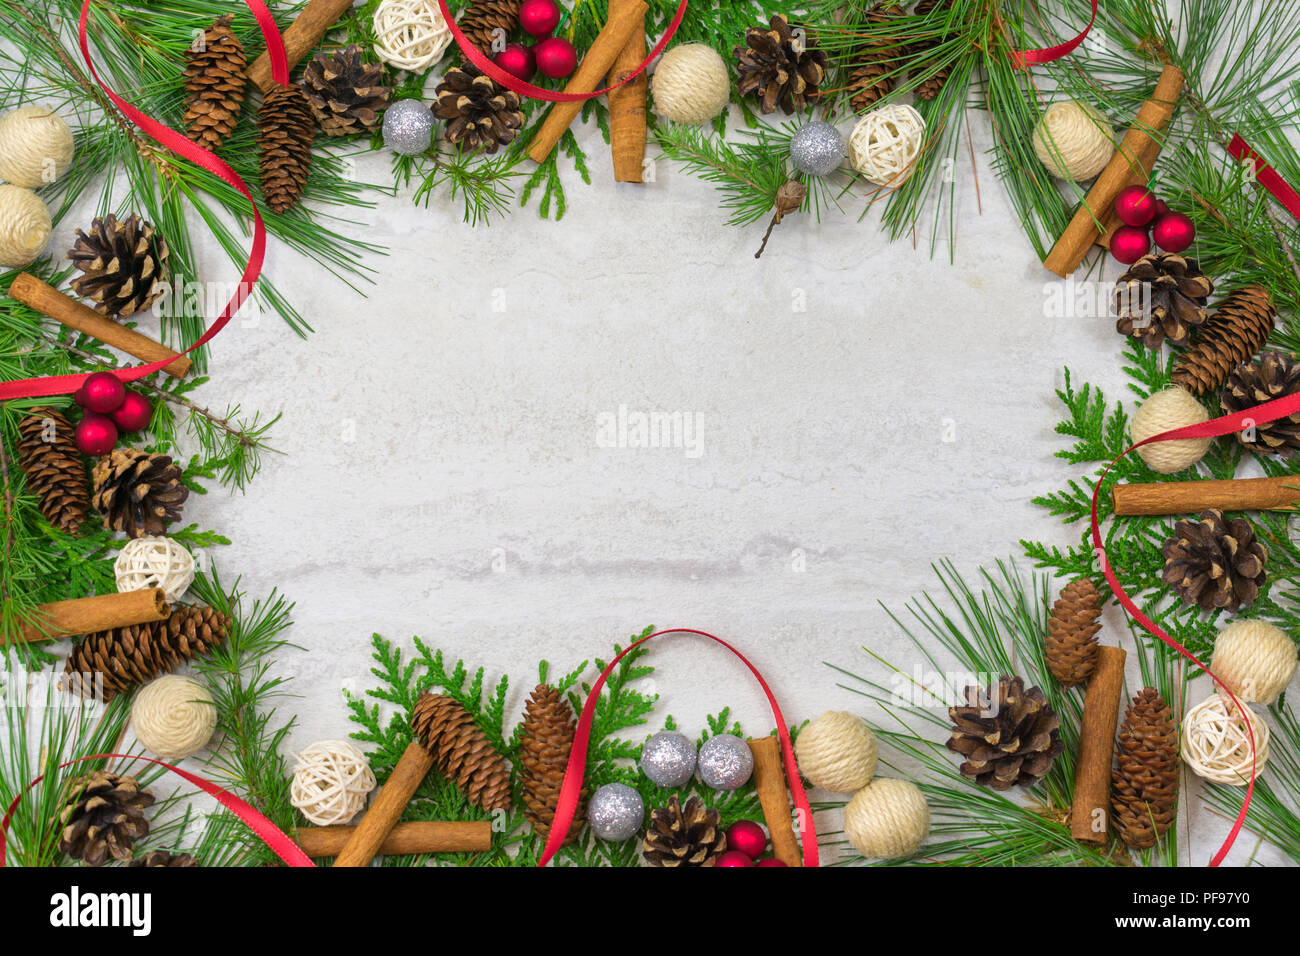 A border of cedar, white pine, and tamarack branches along with scotch pine. spruce, and hemlock pine cones, cinnamon sticks,twine and twig  balls, re Stock Photo